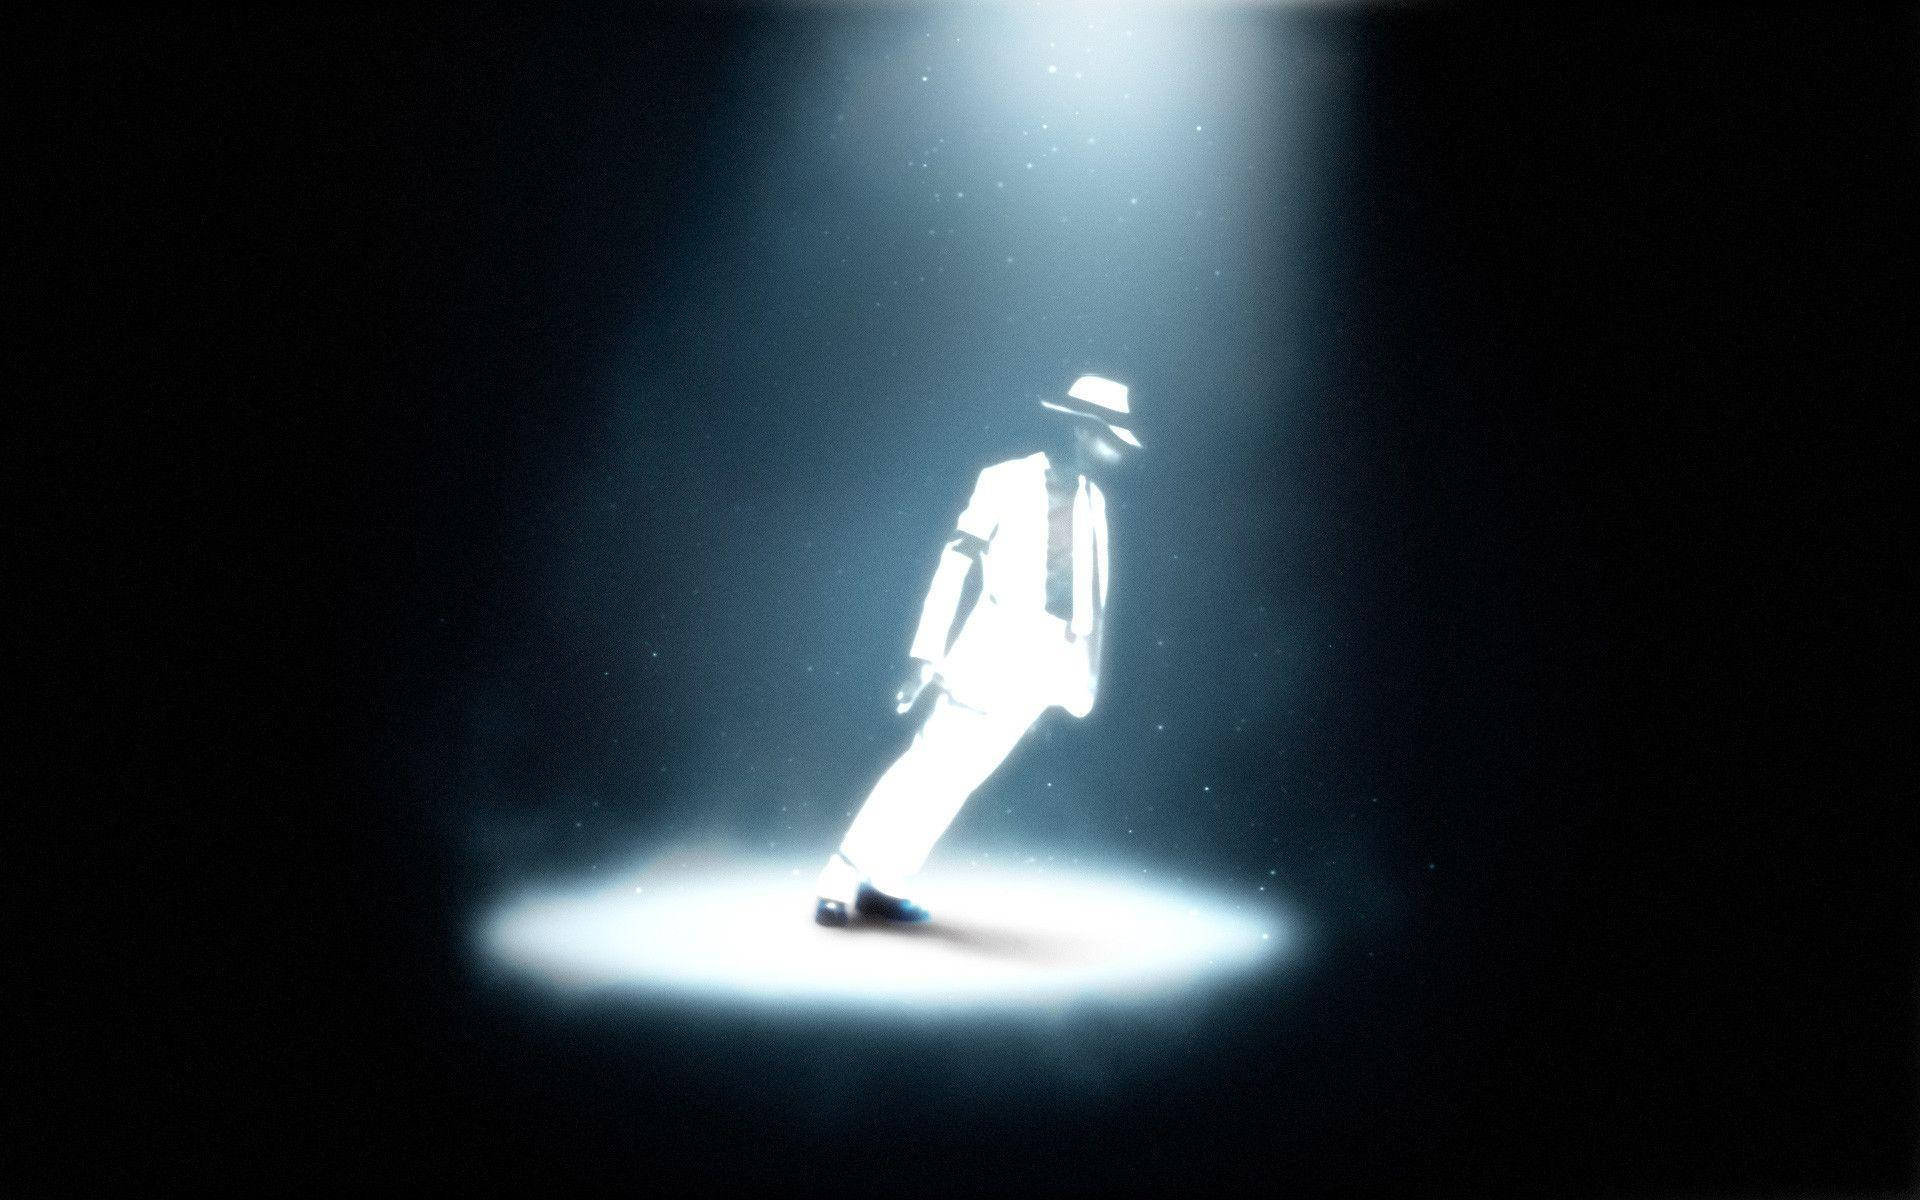 1920X1200 Michael Jackson Wallpaper and Background